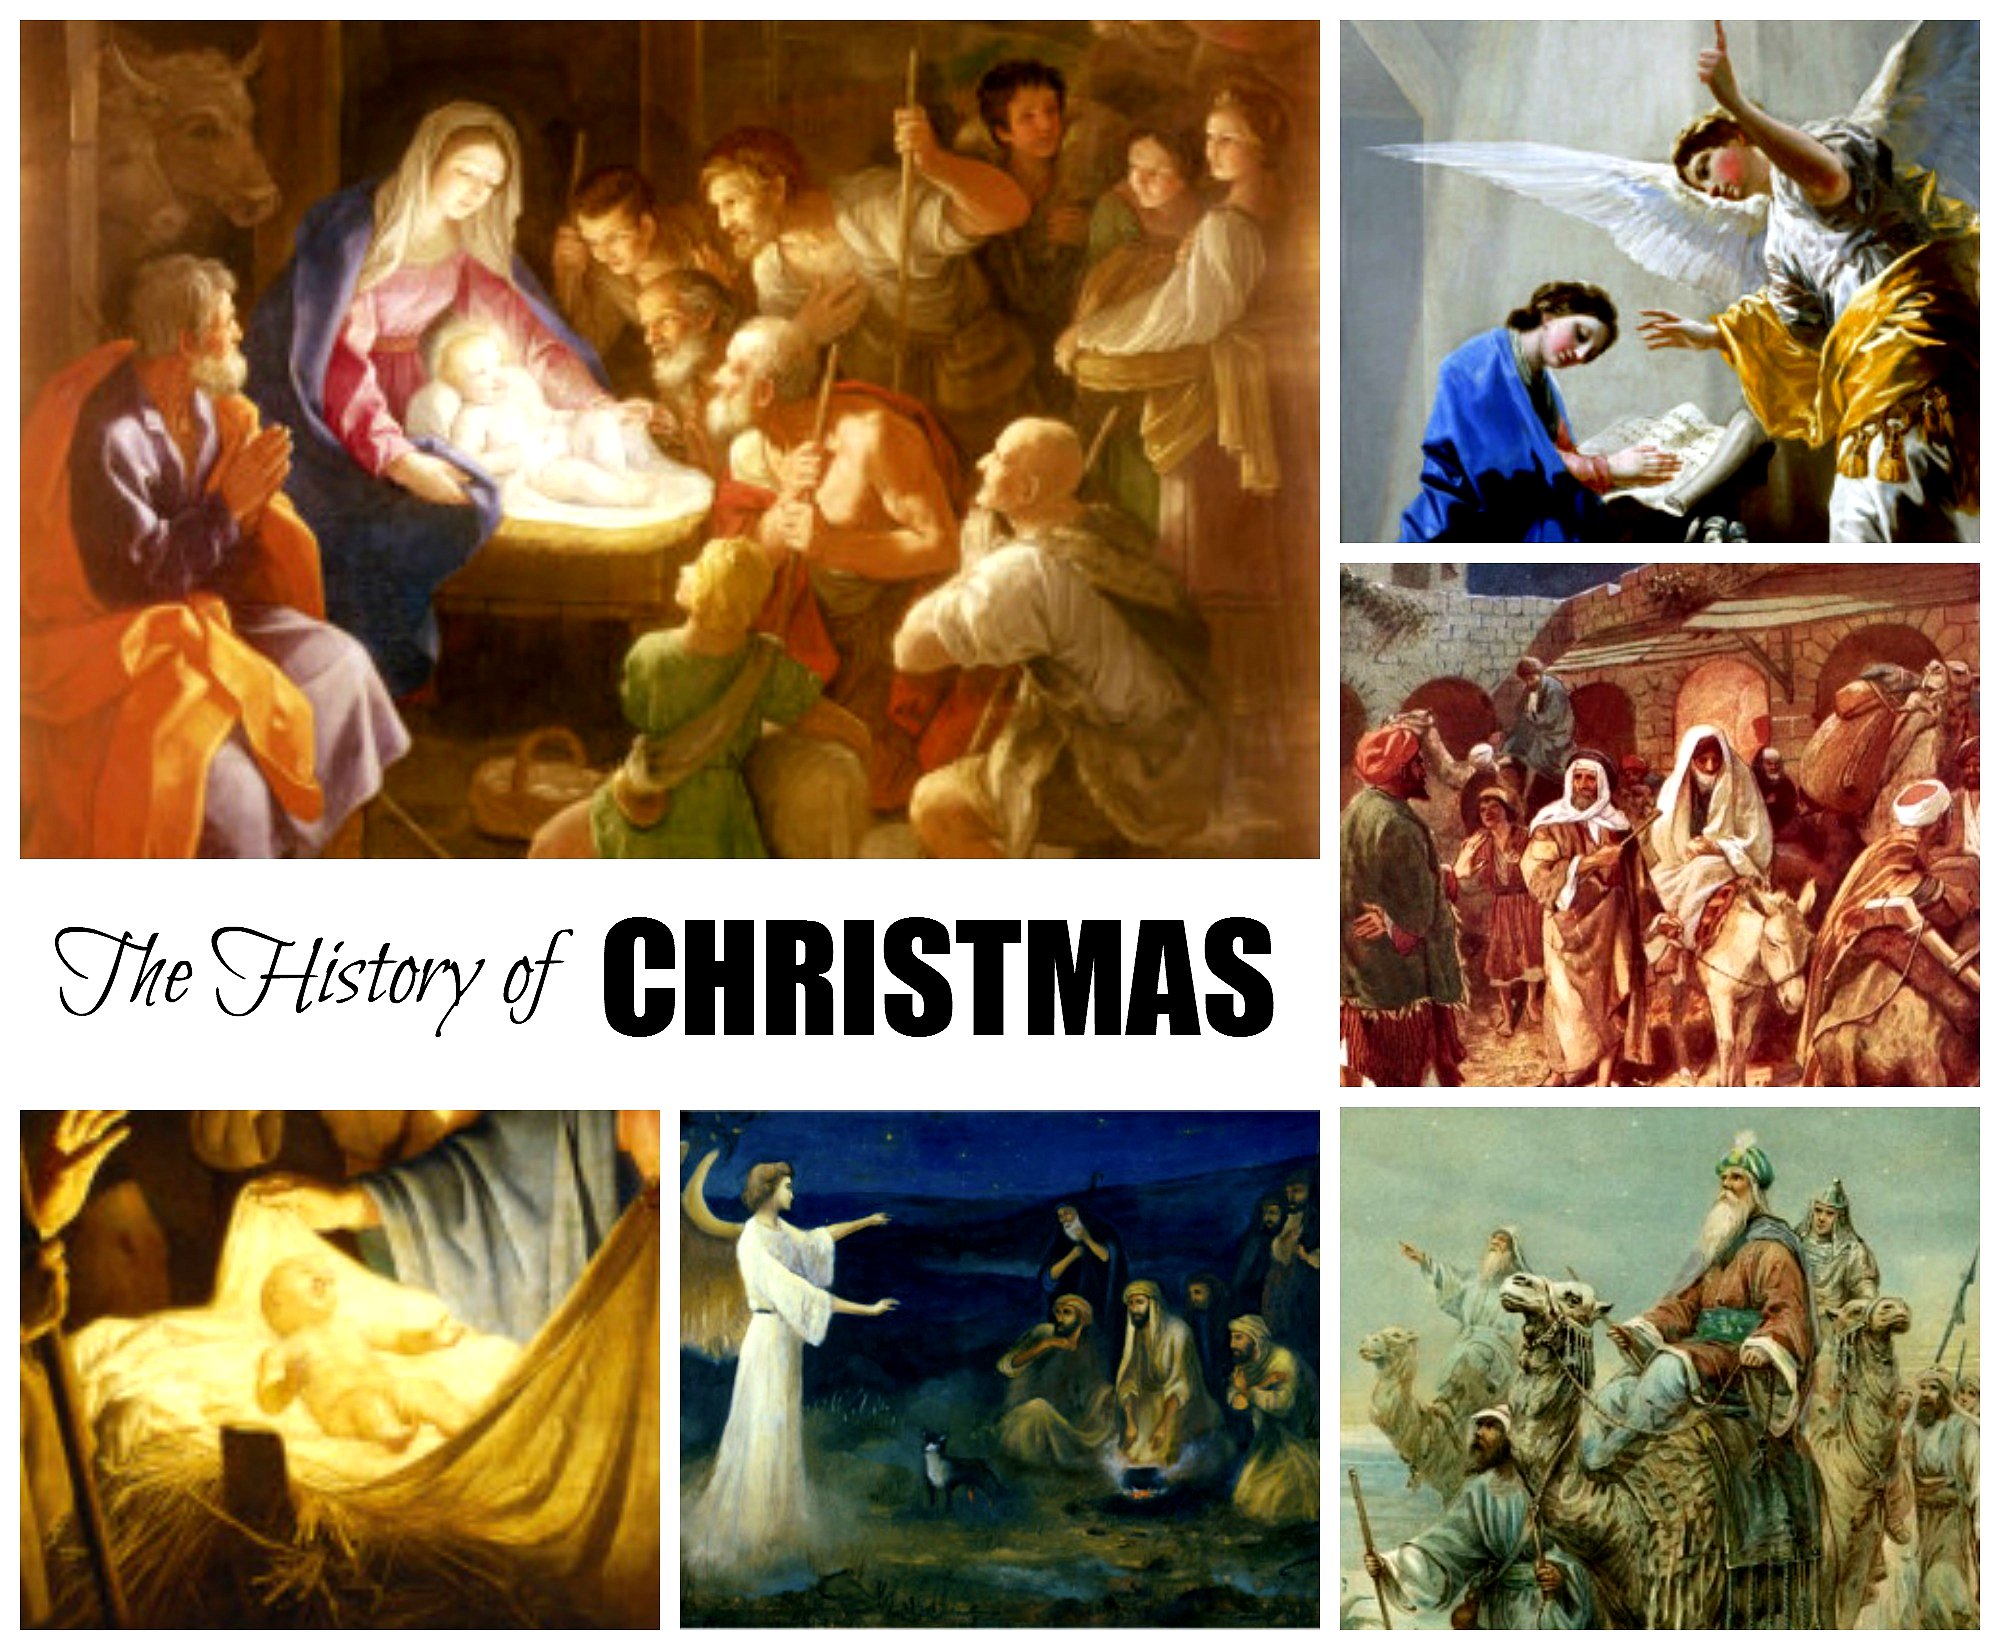 History of Christmas Google image fromhttp://www.celebratingholidays.com/wp-content/uploads/2010/08/historyofchristmascollagea.jpg/